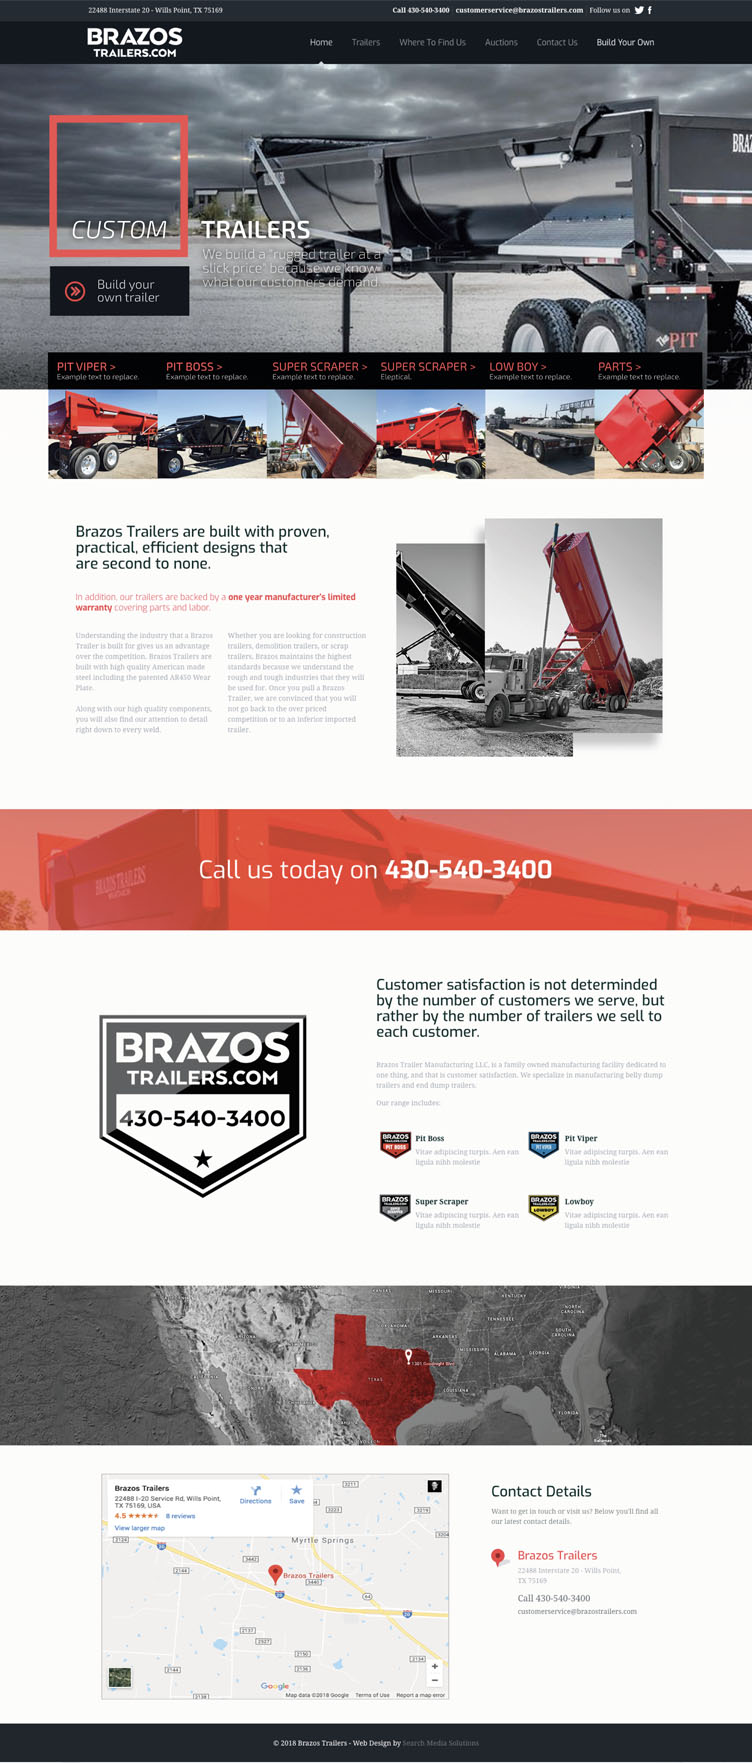 A full showcase of a web design DCI Digital undertook for the Brazos Trailer company in the USA